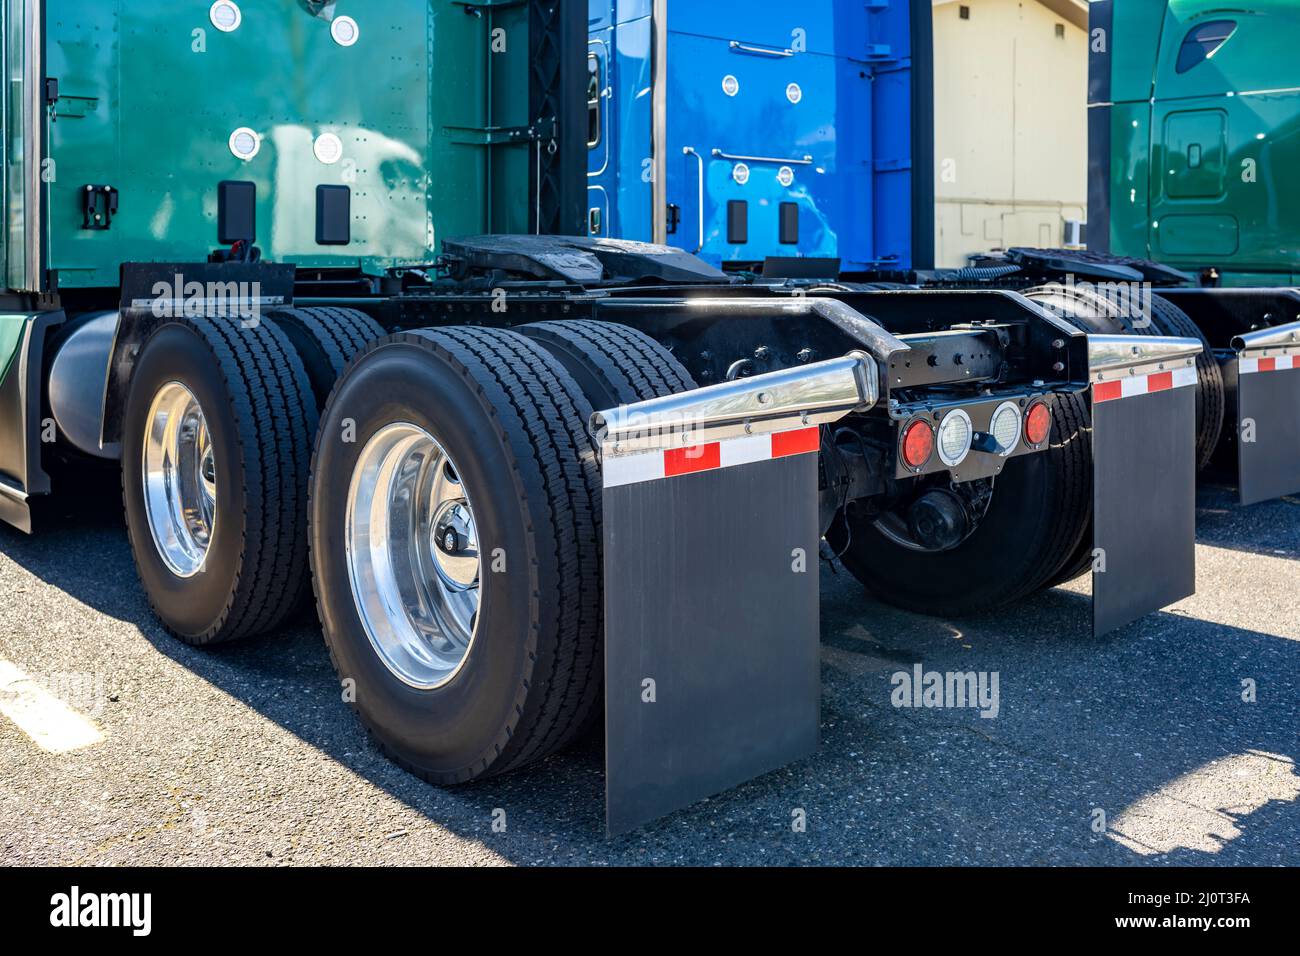 Industrial grade powerful big rigs semi trucks tractors with double wheels on the axles with large tread pattern on tires for better grip standing on Stock Photo